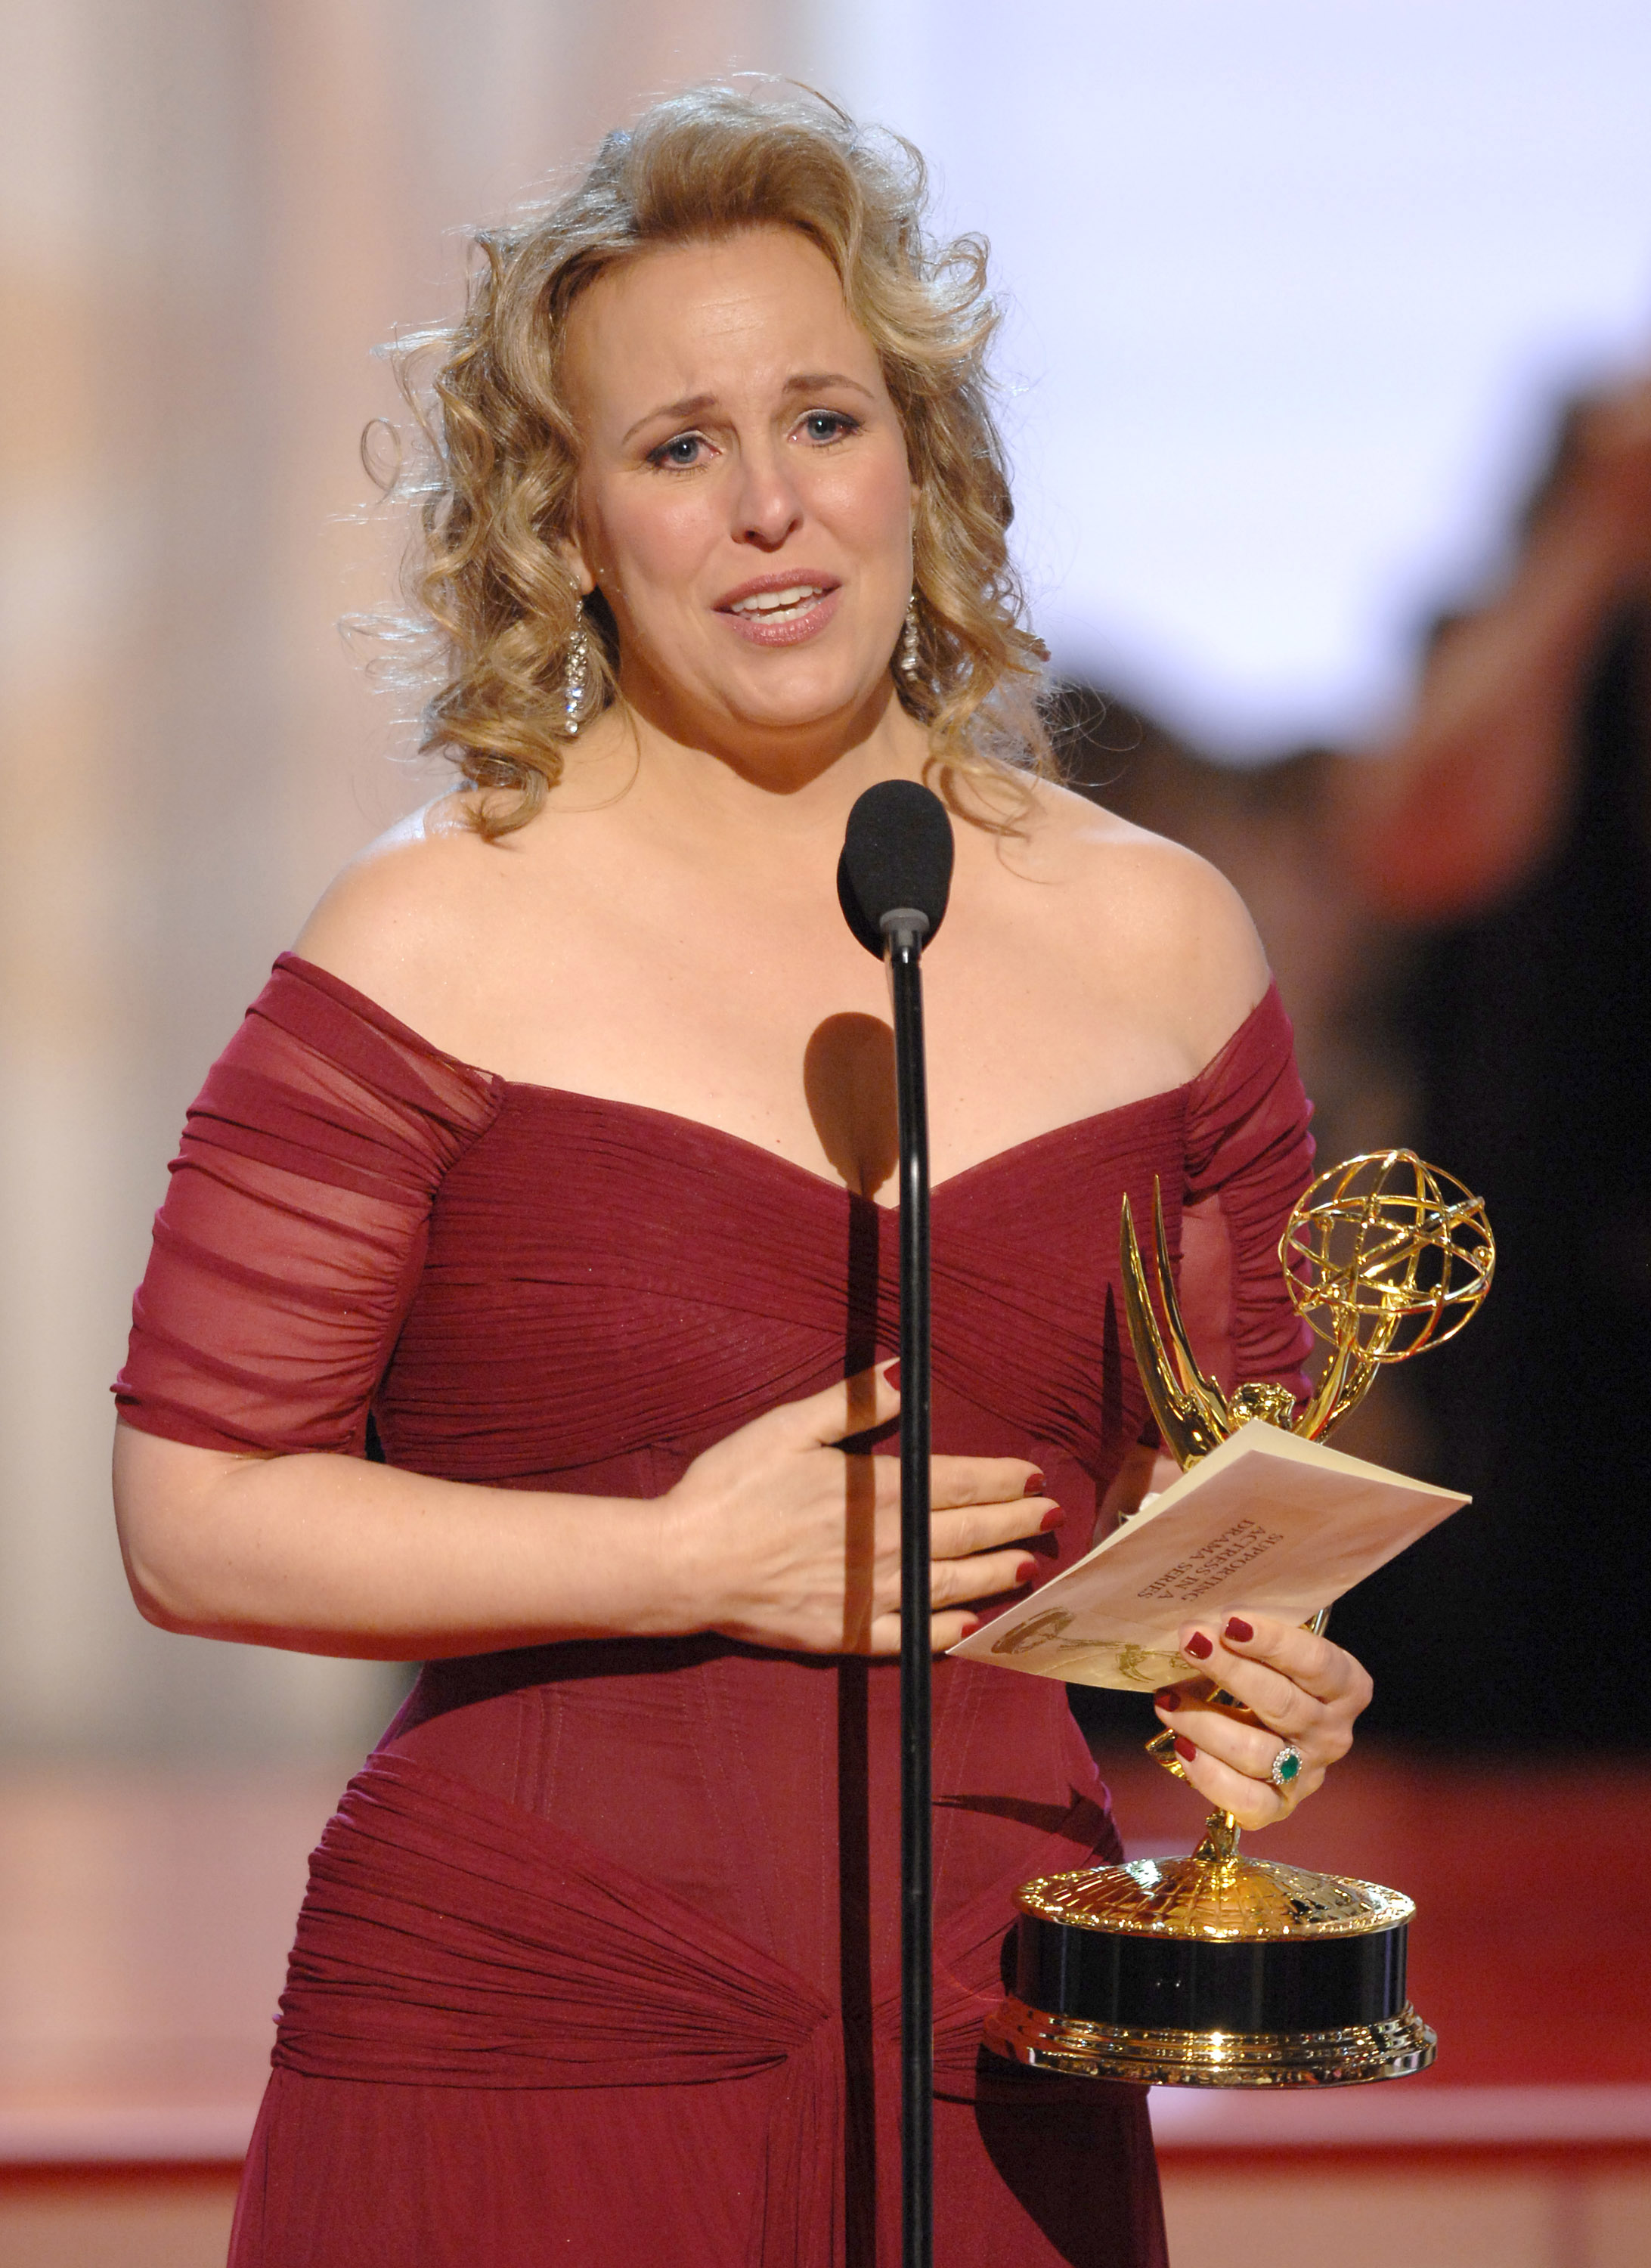 Genie Francis at the 34th Annual Daytime Emmy Awards in Hollywood, California | Source: Getty Images